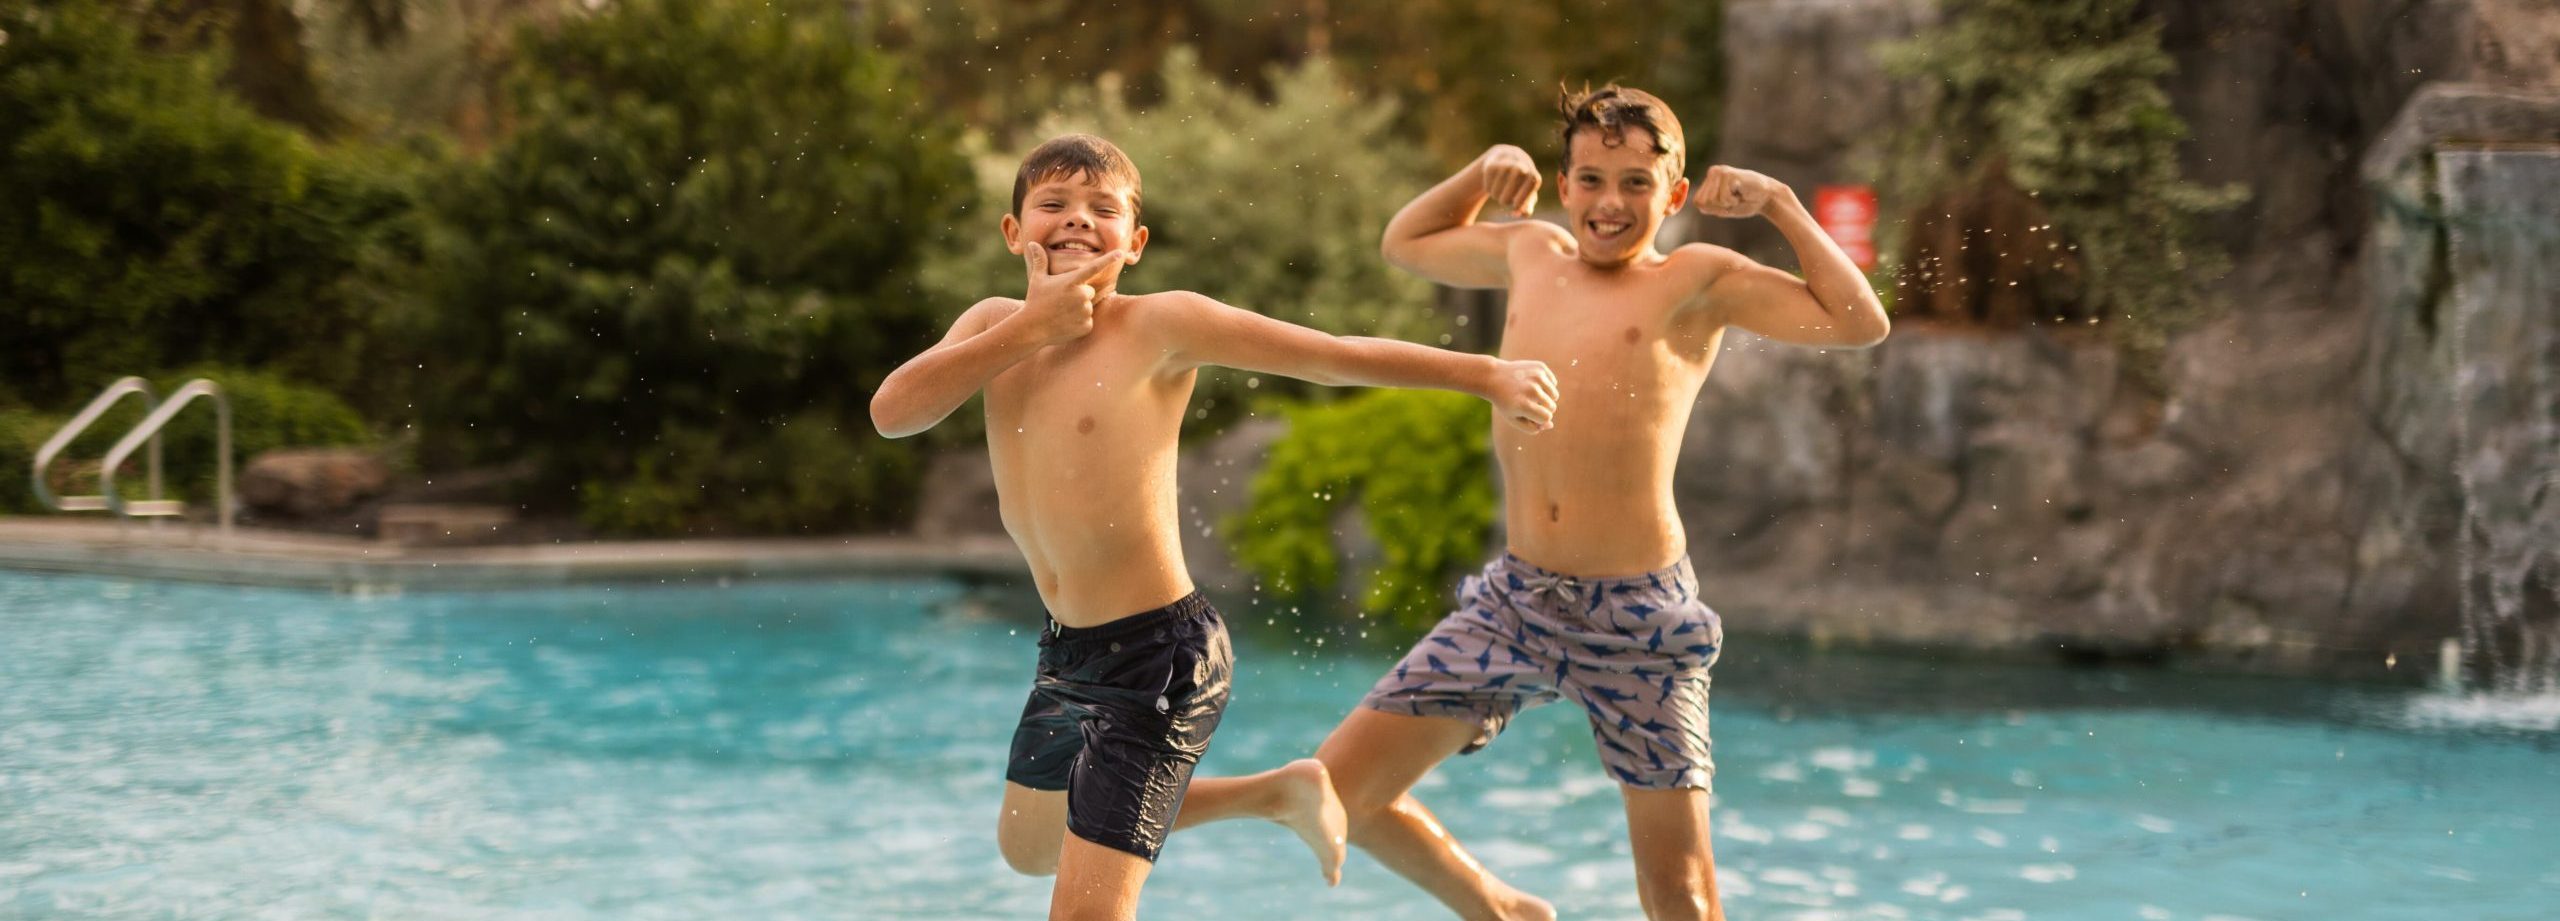 two boys jumping in pool